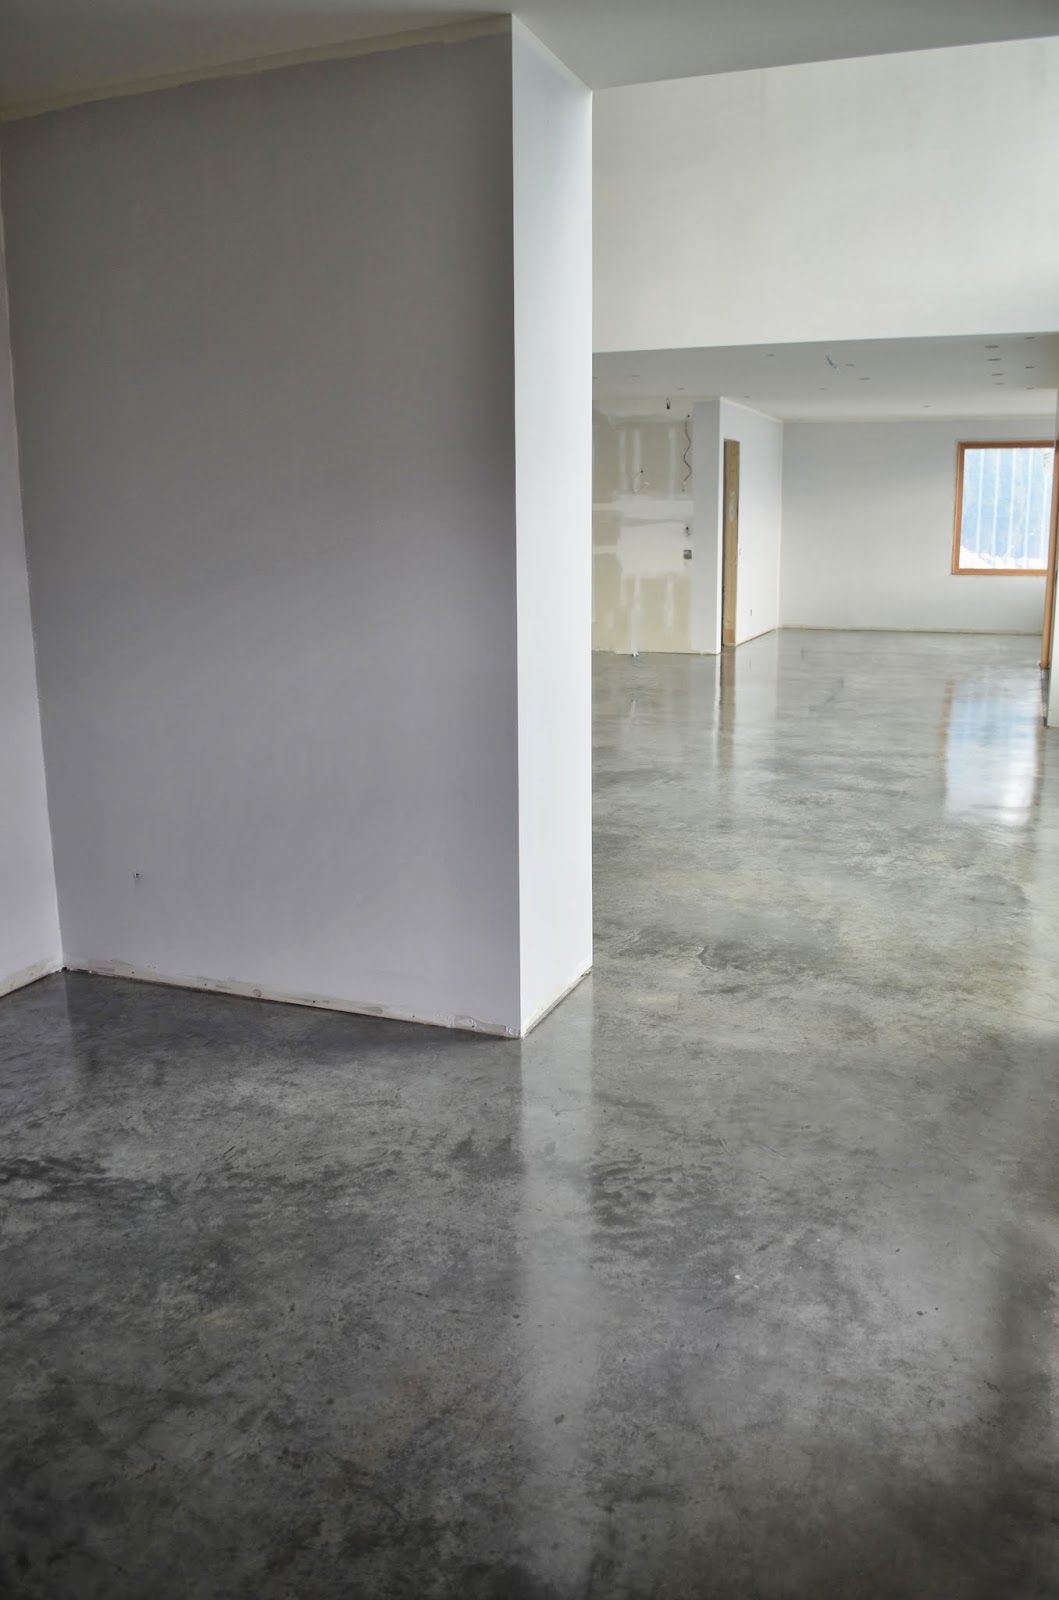 What is the purpose of hiring flooring contractors